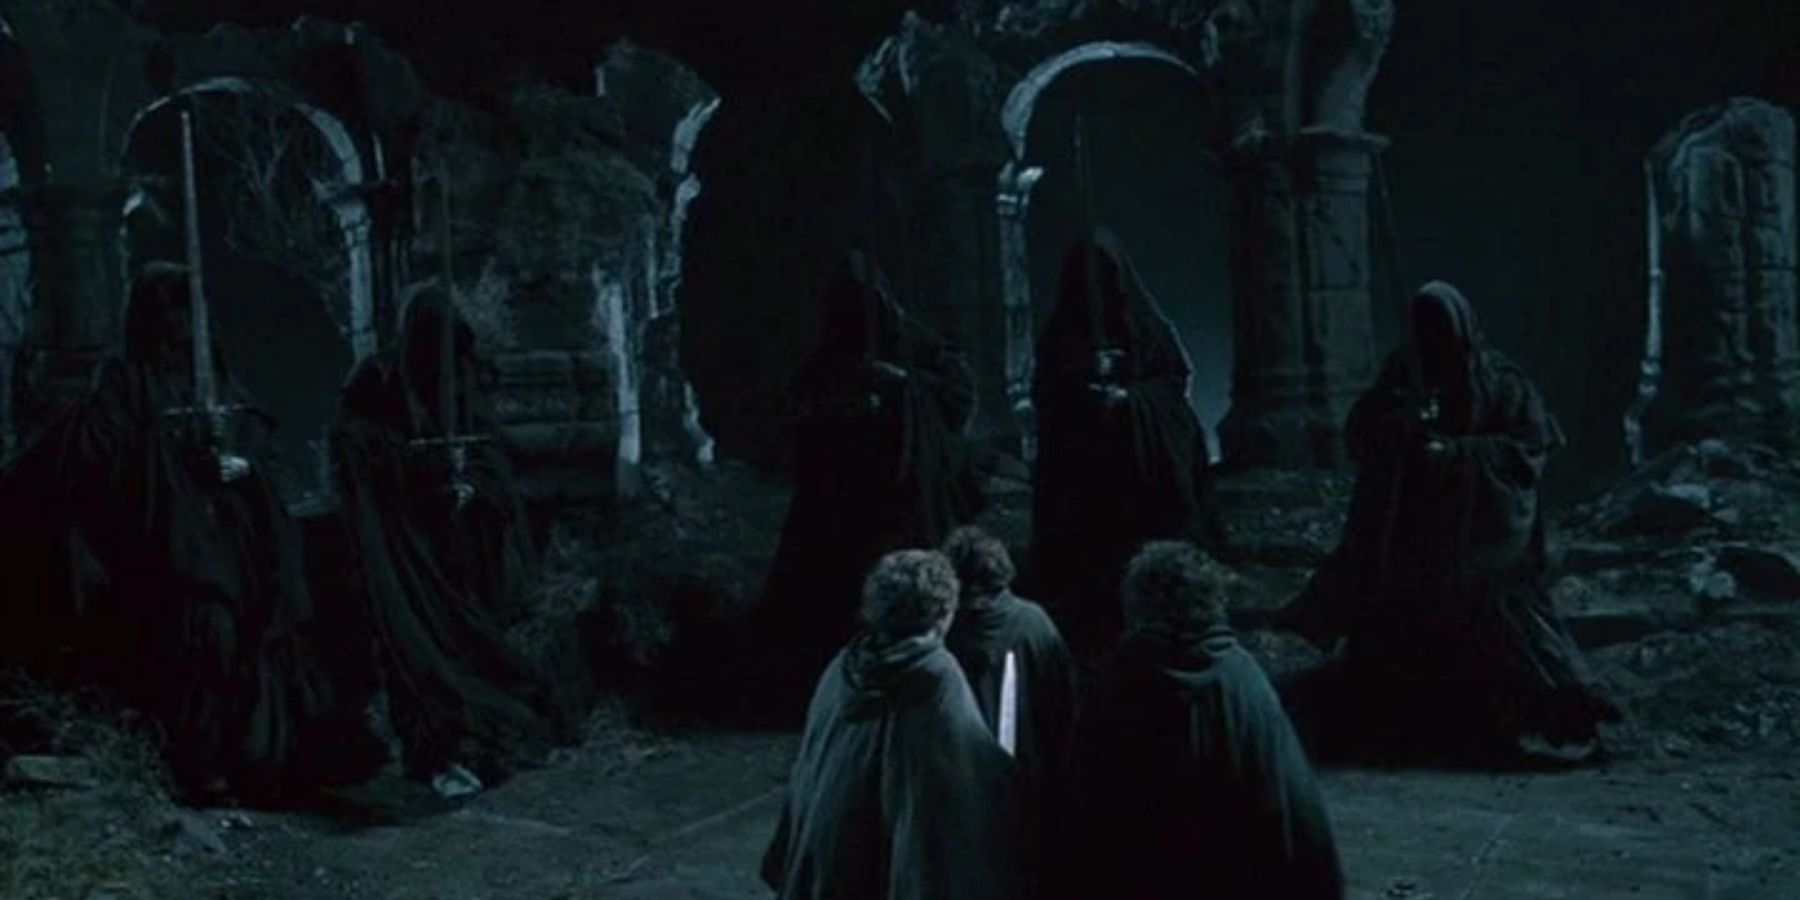 The Hobbits are surrounded by Nazgul